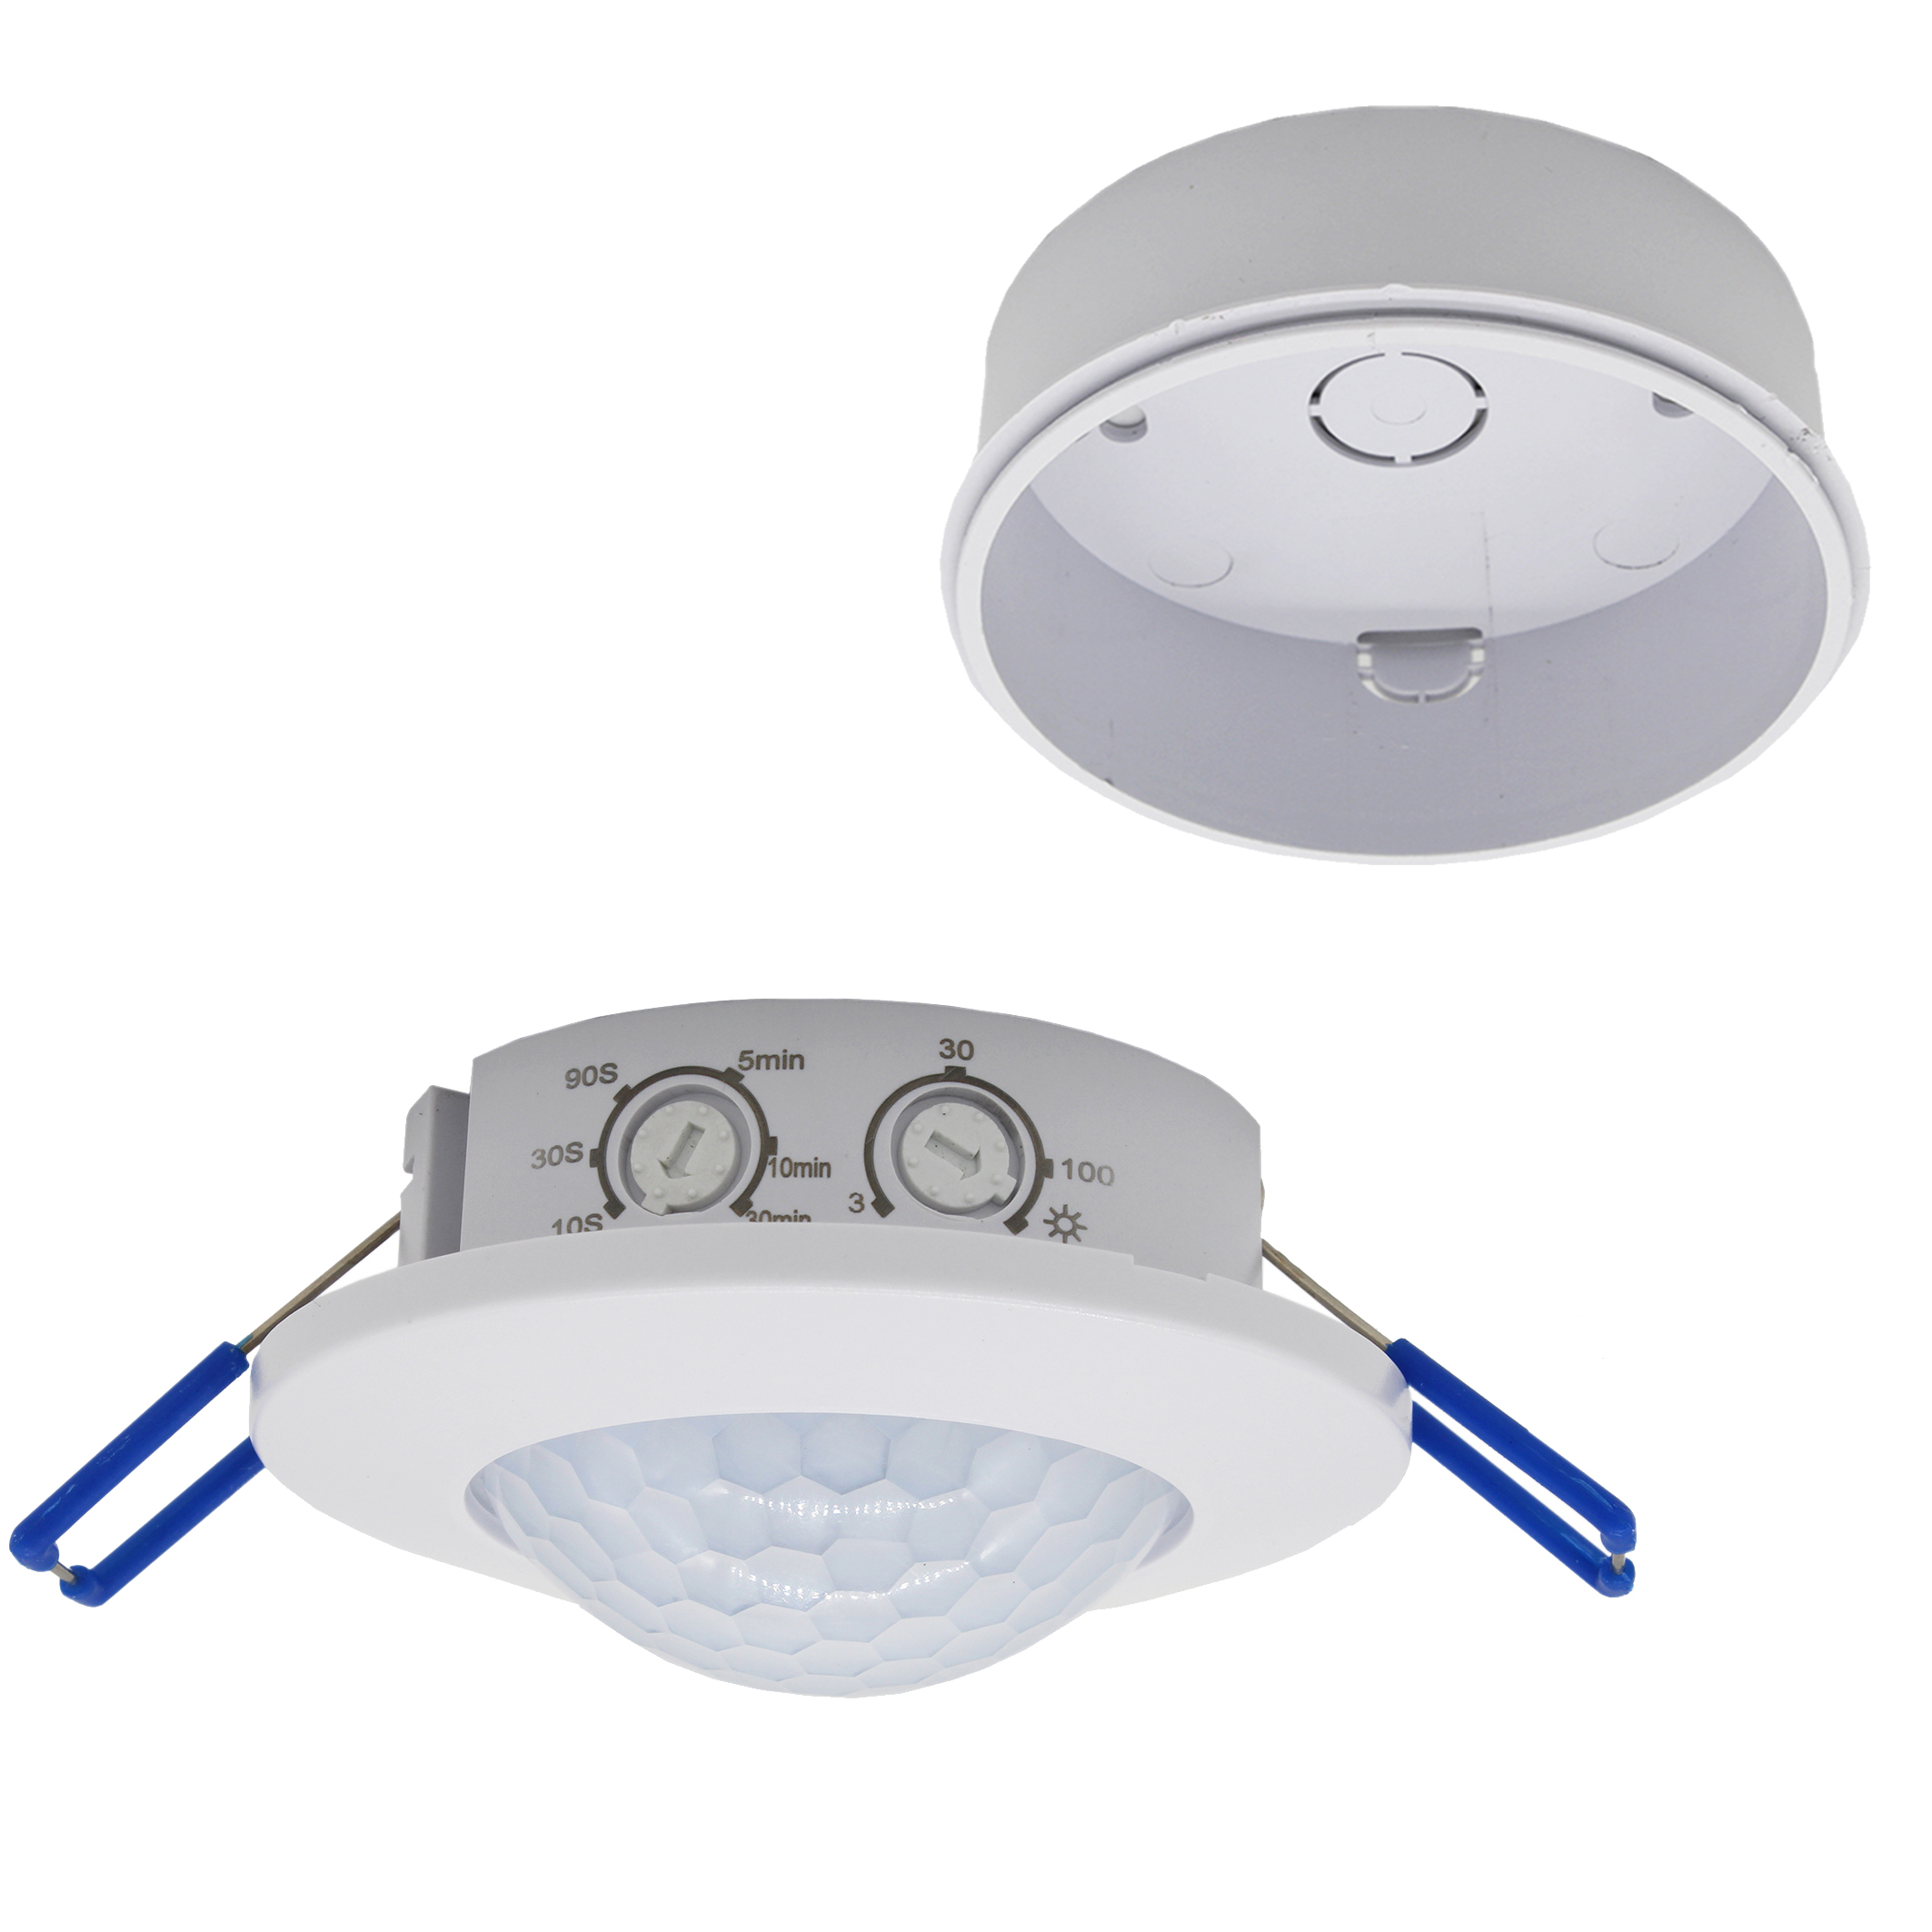 Surface Mounted and Recessed Mounted 2 in 1 PIR Motion Sensor (PS-SS94C)